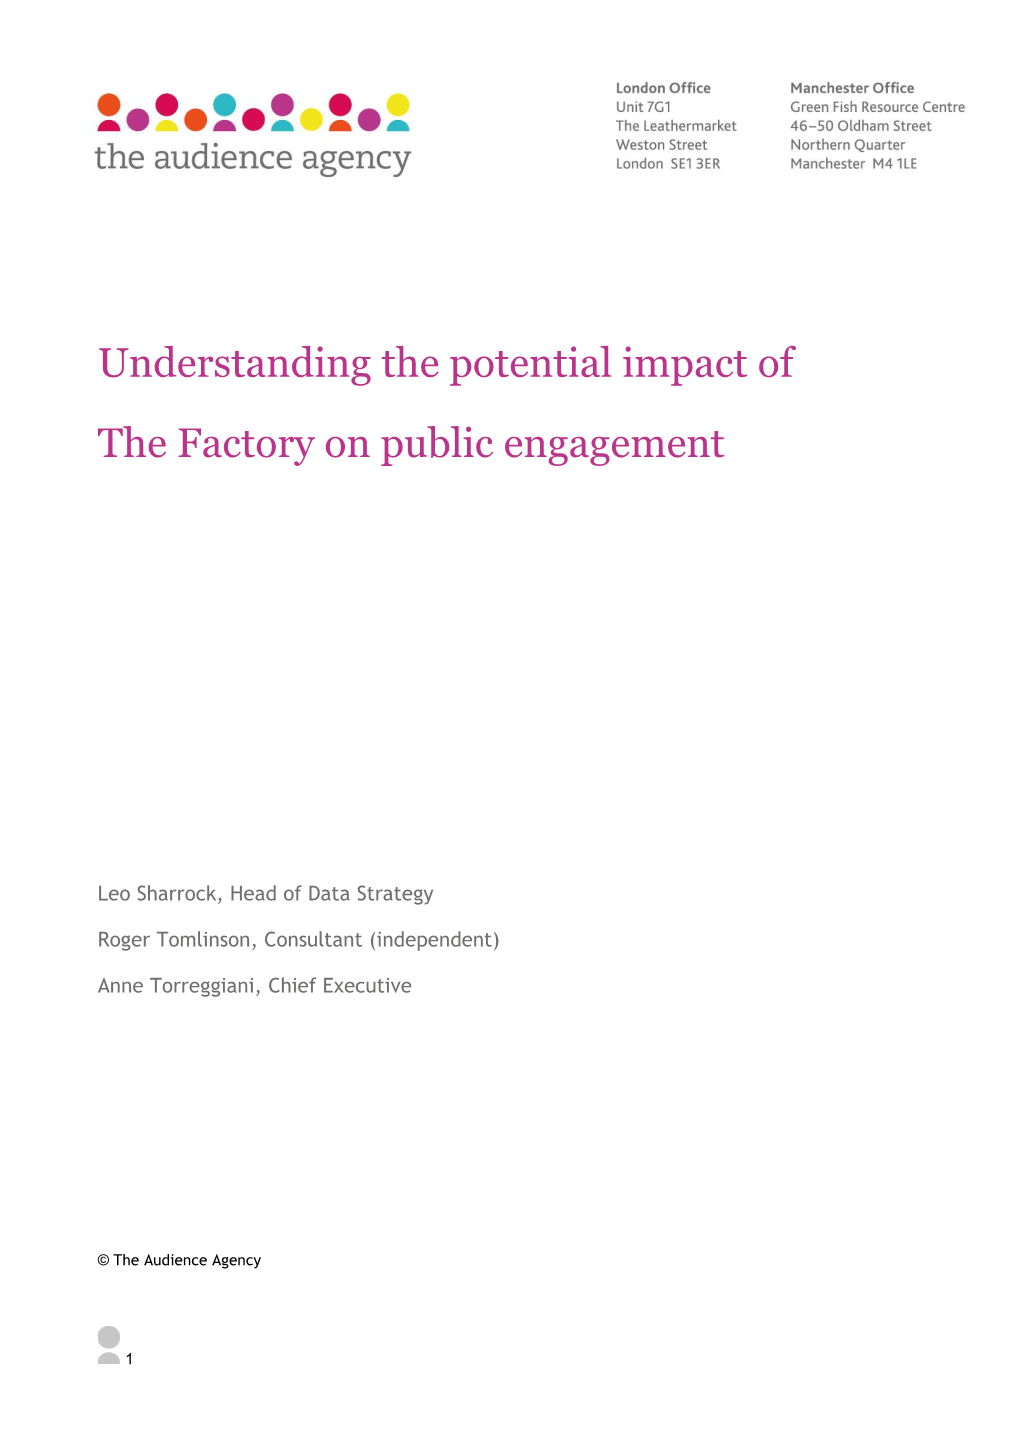 Understanding the Potential Impact of the Factory on Public Engagement